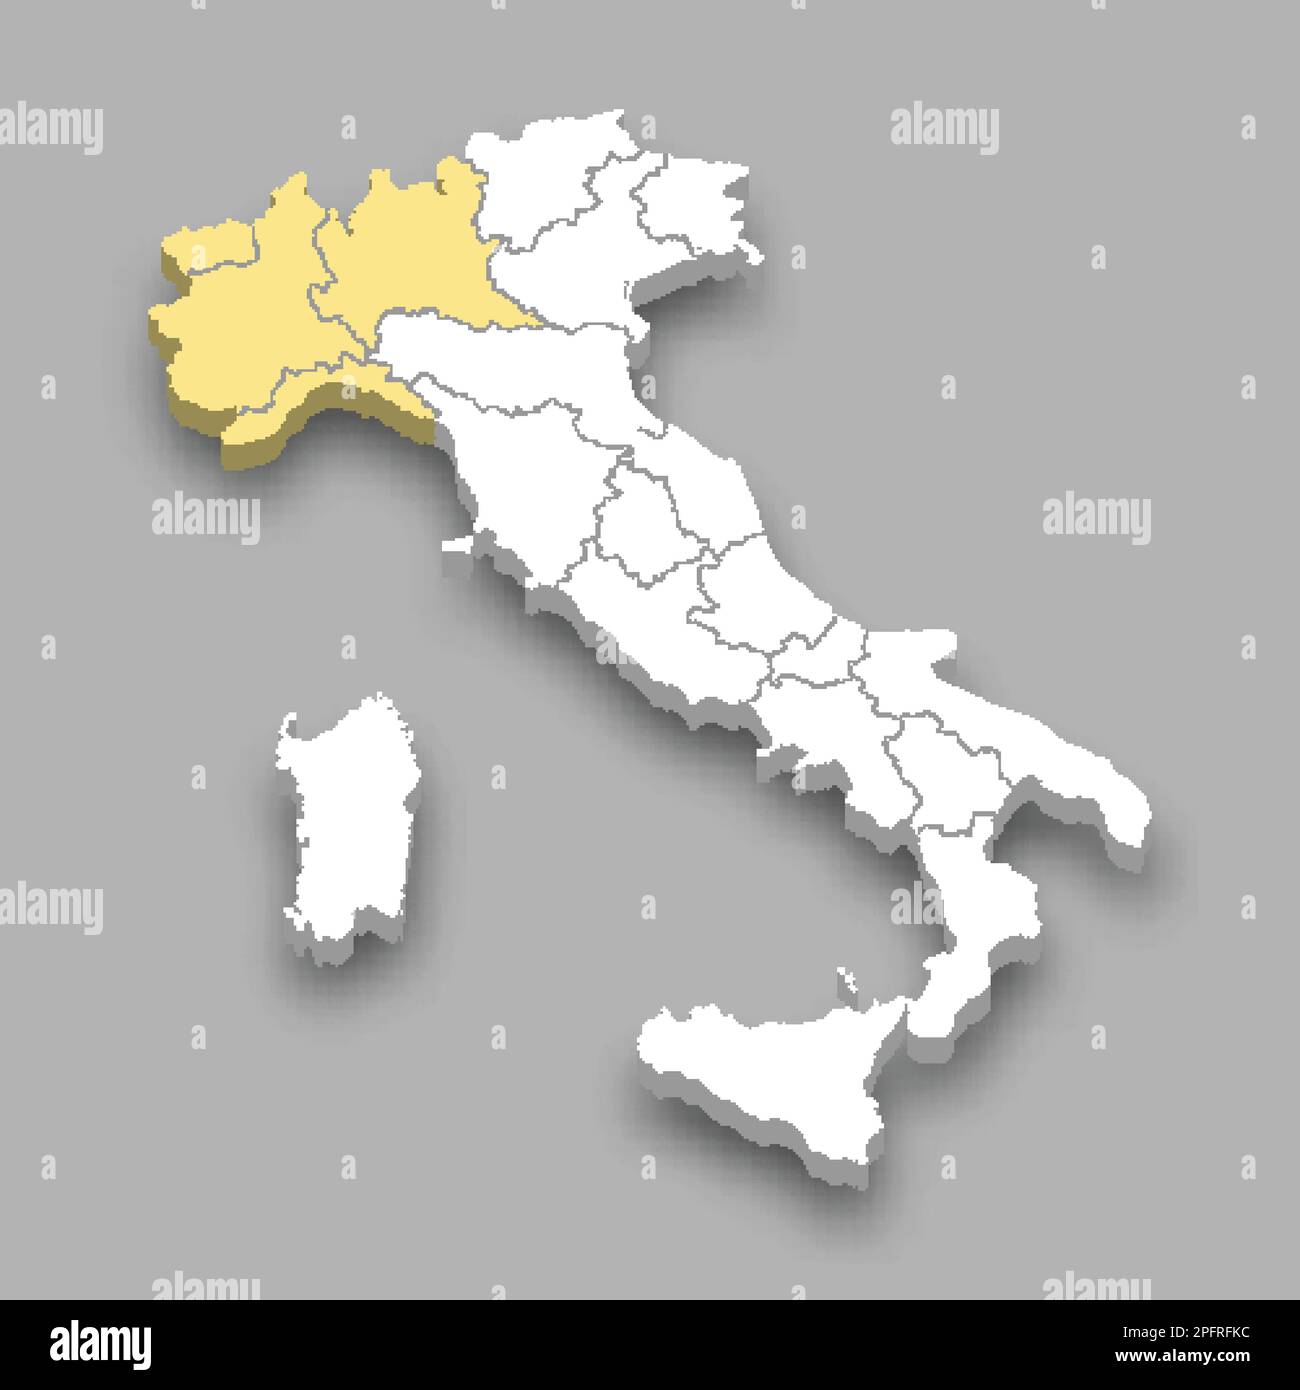 North-West region location within Italy 3d isometric map Stock Vector